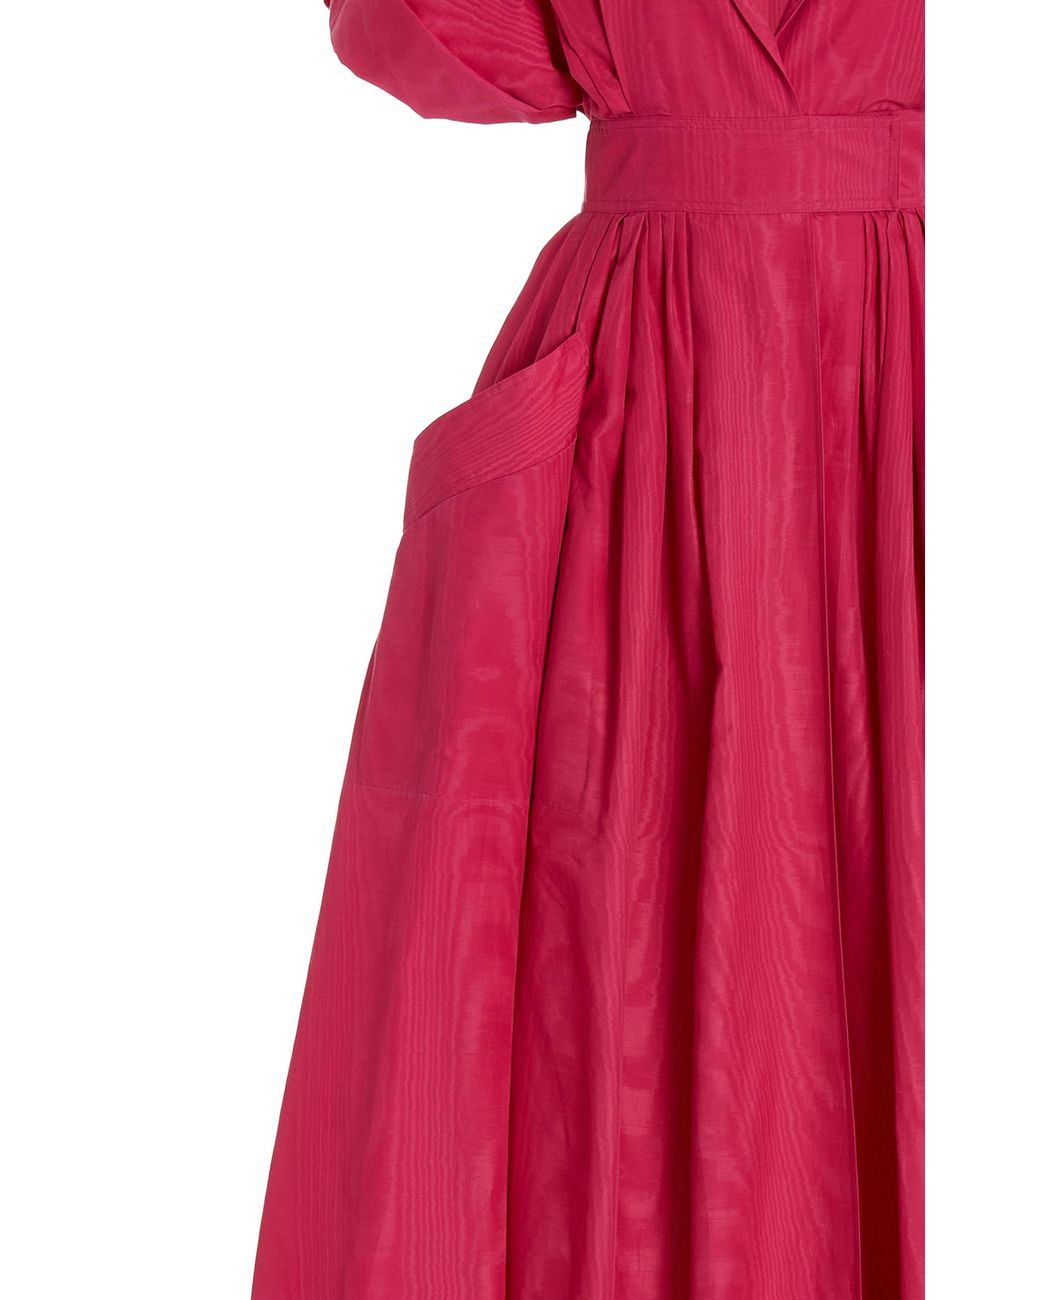 Carolina Herrera Leather Moire Taffeta Trench Gown in Pink | Lyst